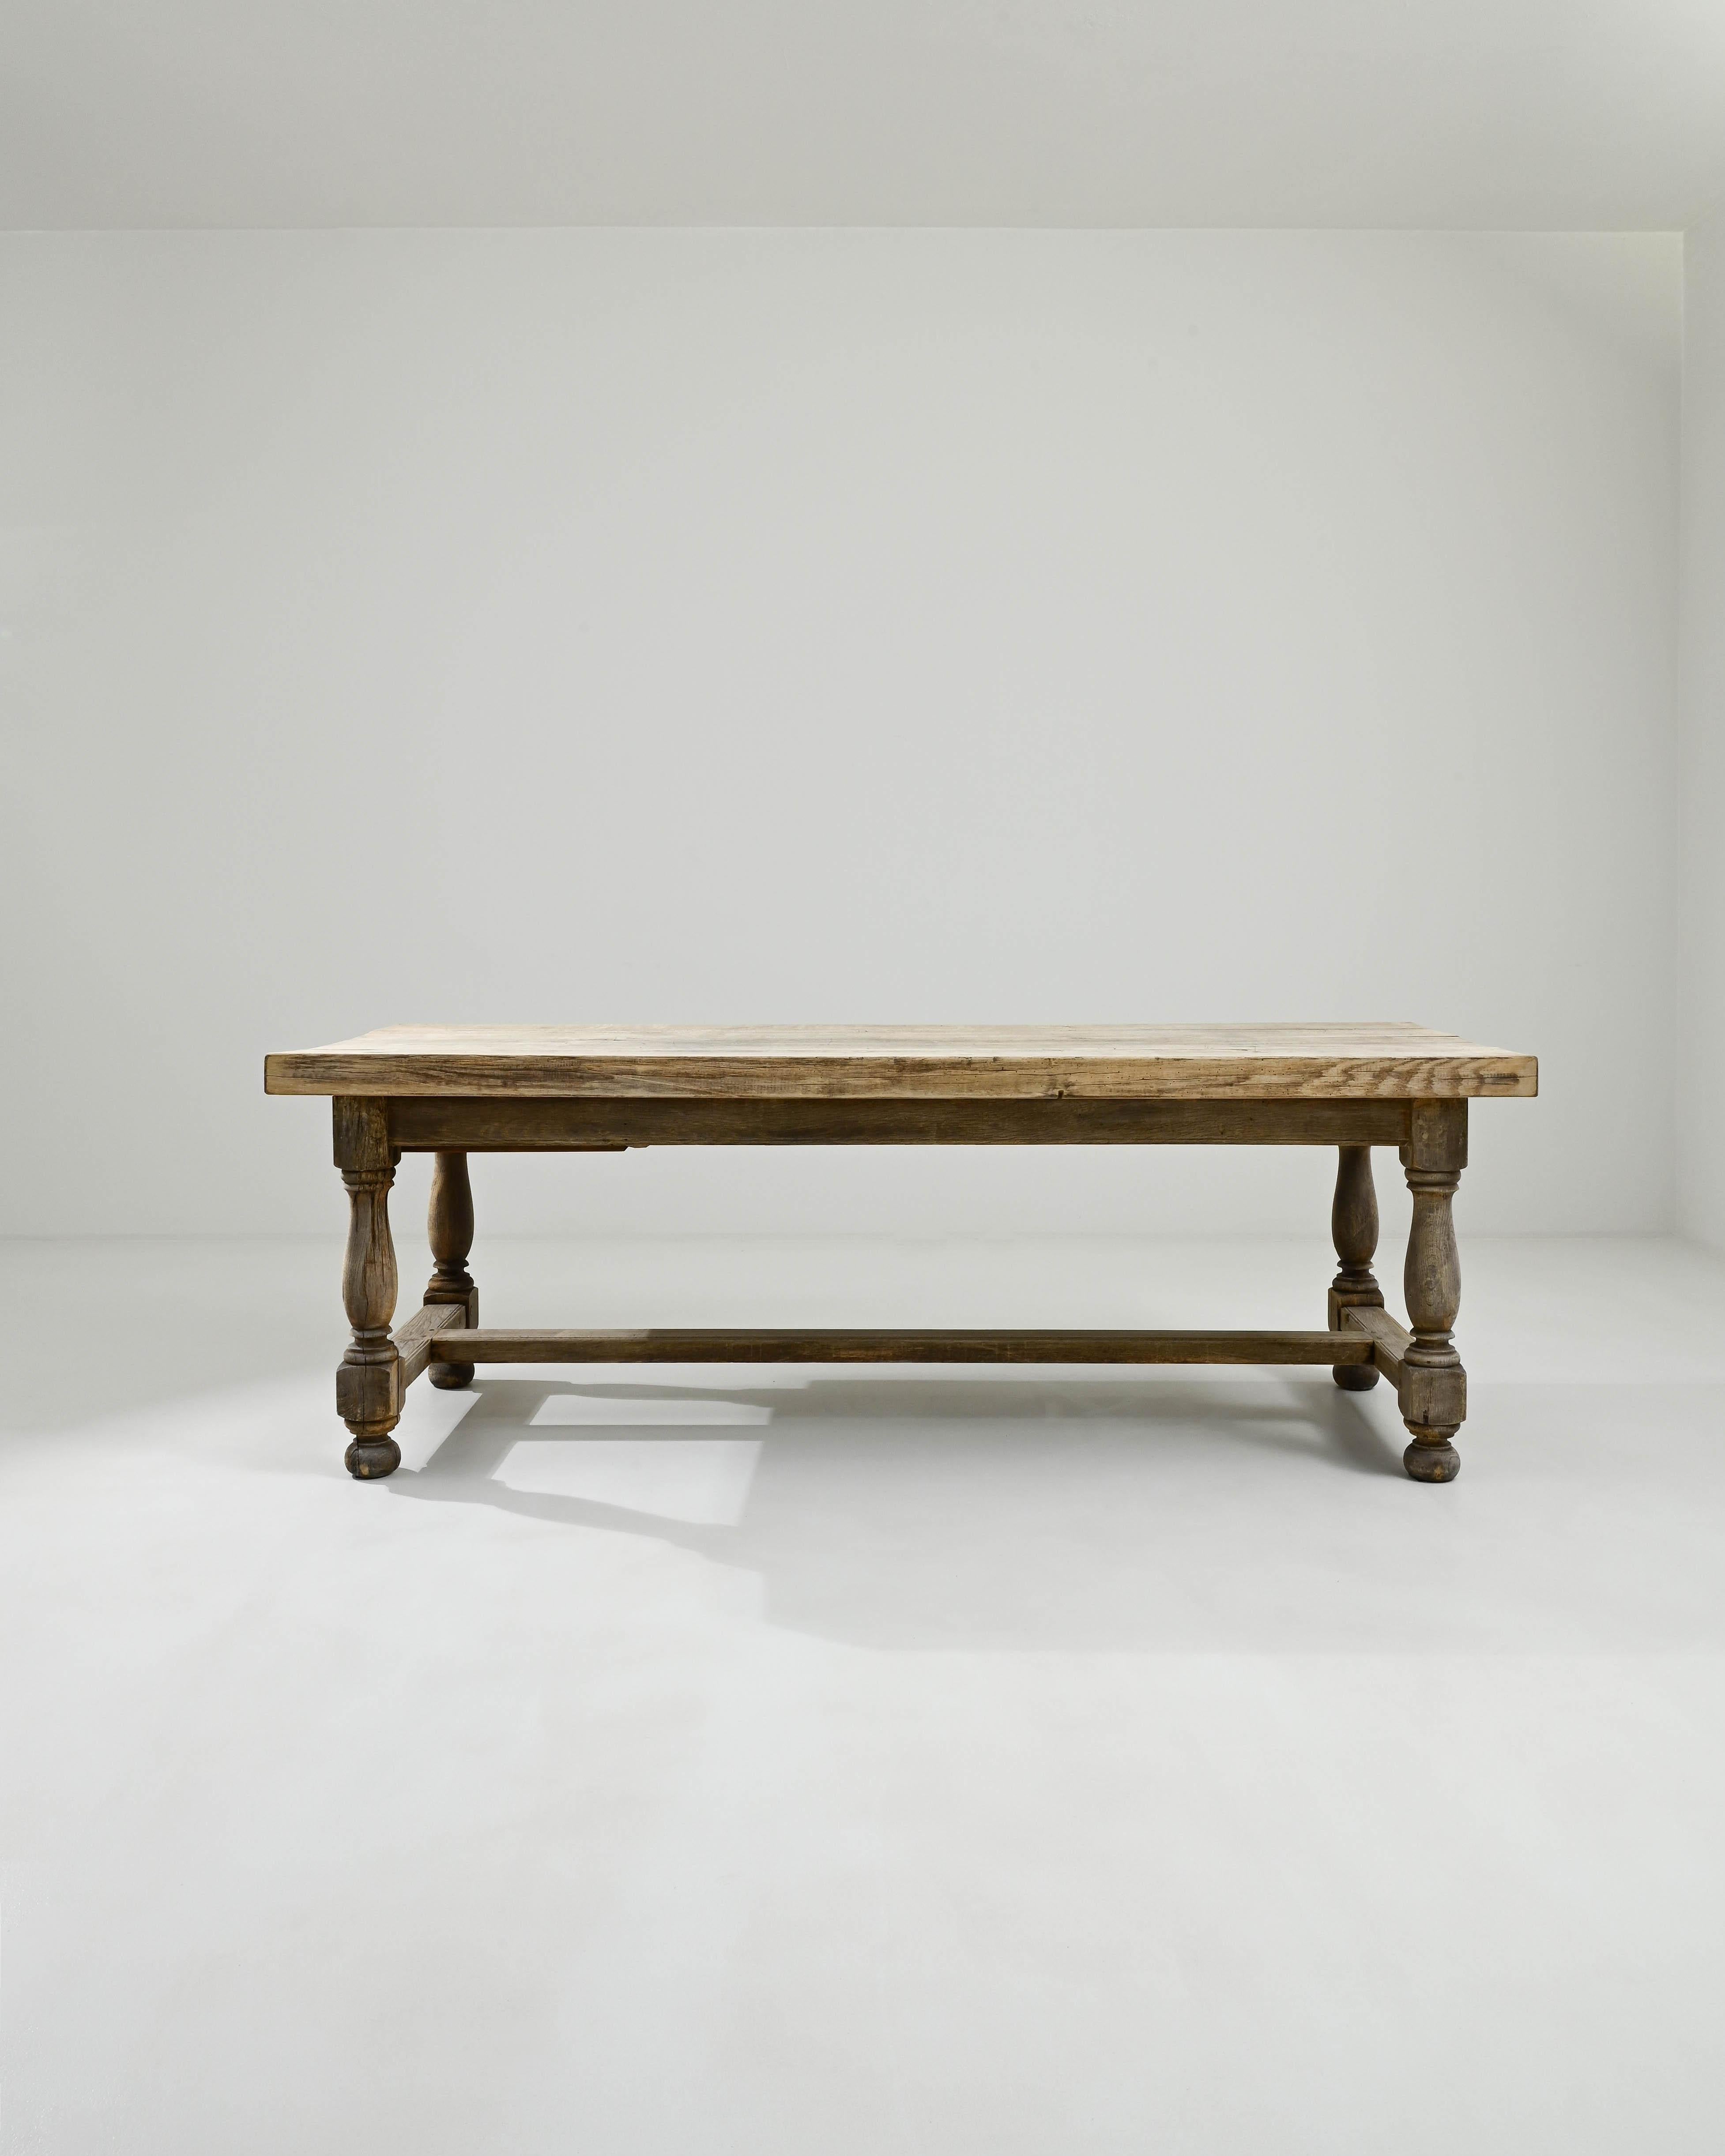 Solid and statuesque, this vintage oak dining table makes a magnificent Provincial centerpiece. Built in Belgium in the 20th century, carved ball feet and gracefully contoured legs create an attractive profile, lending an elegant inflection to the